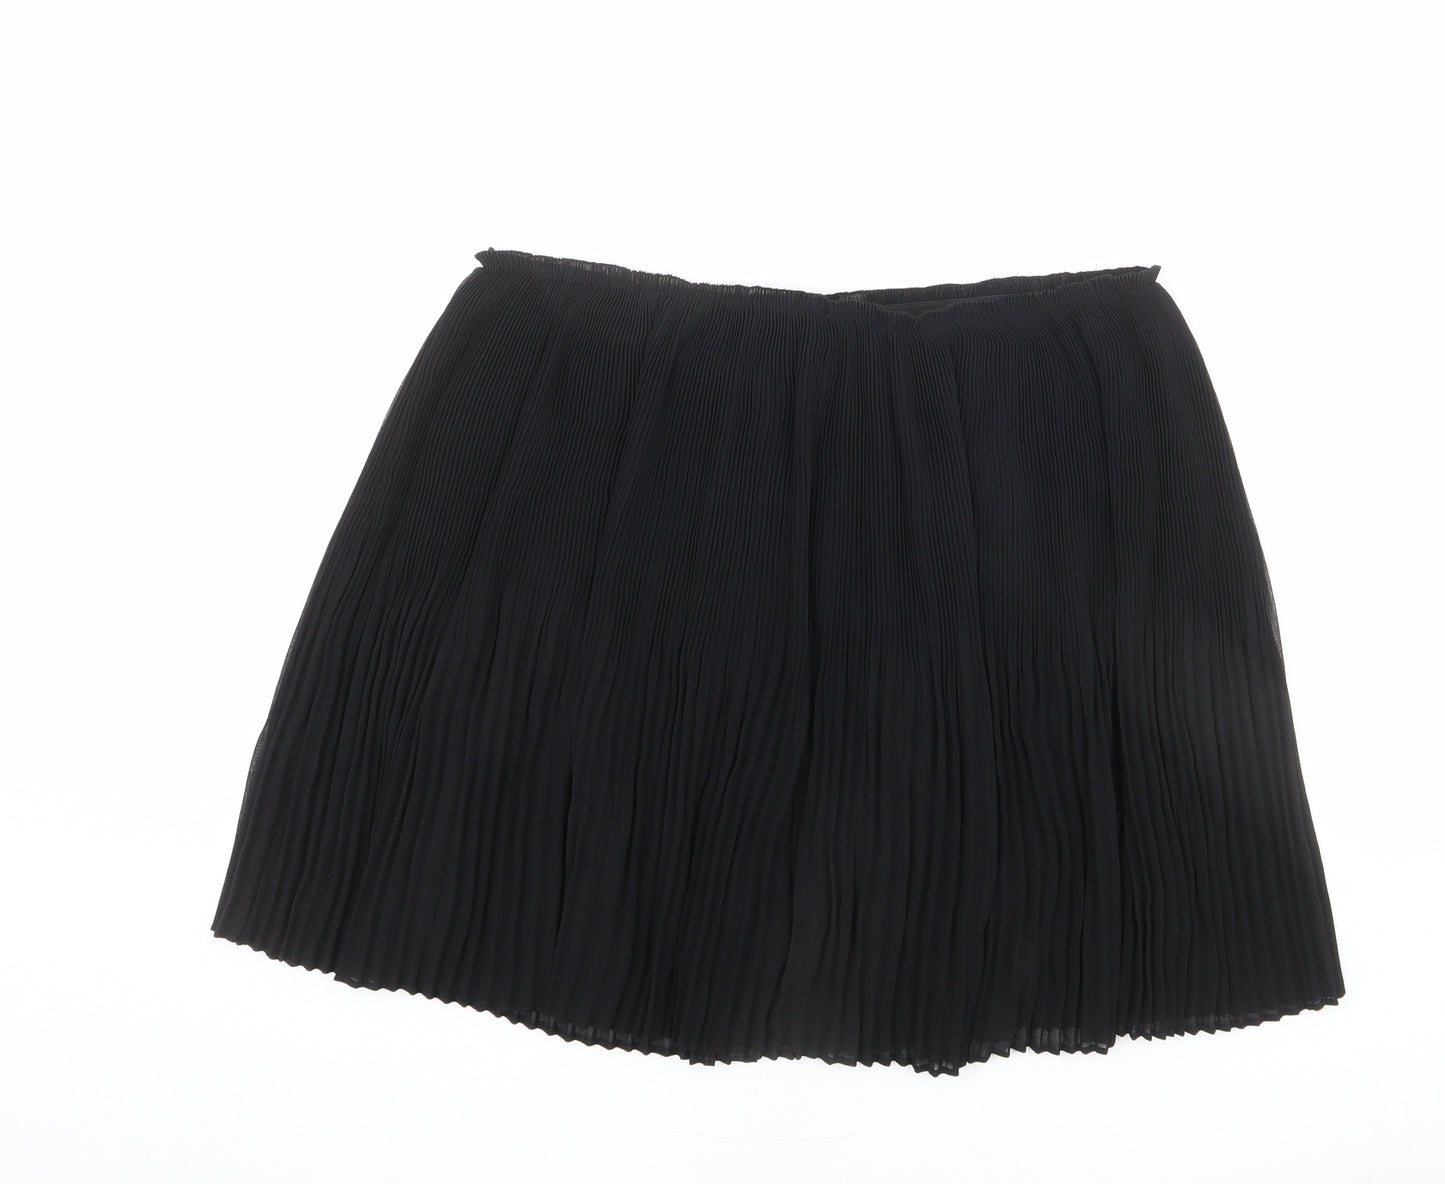 H&M Womens Black Polyester Pleated Skirt Size 16